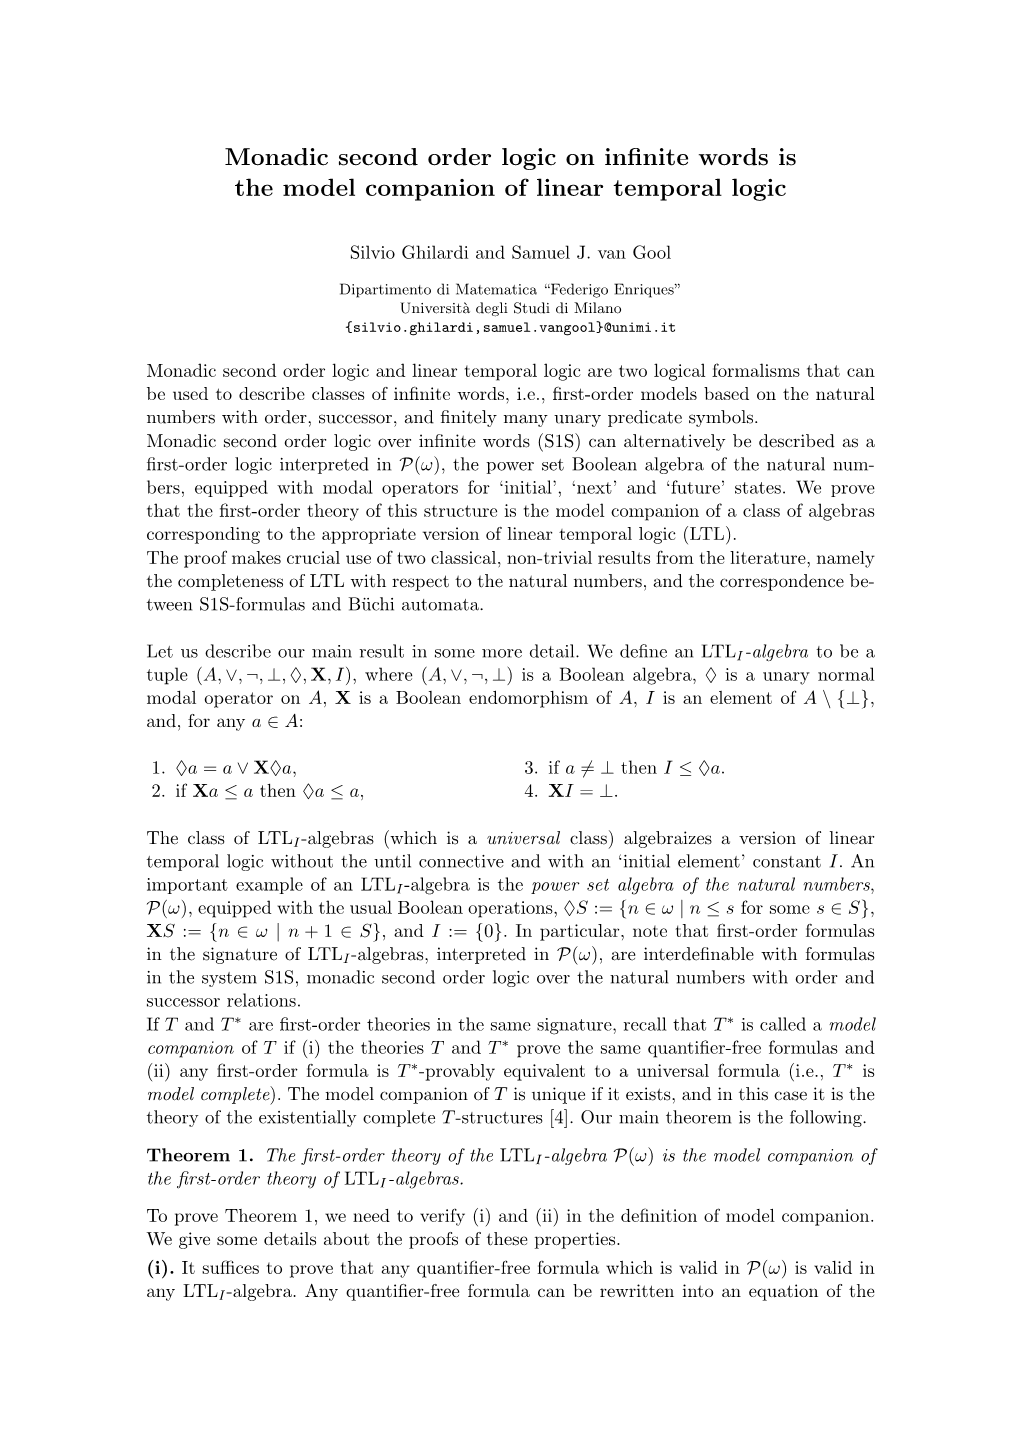 Monadic Second Order Logic on Infinite Words Is the Model Companion of Linear Temporal Logic